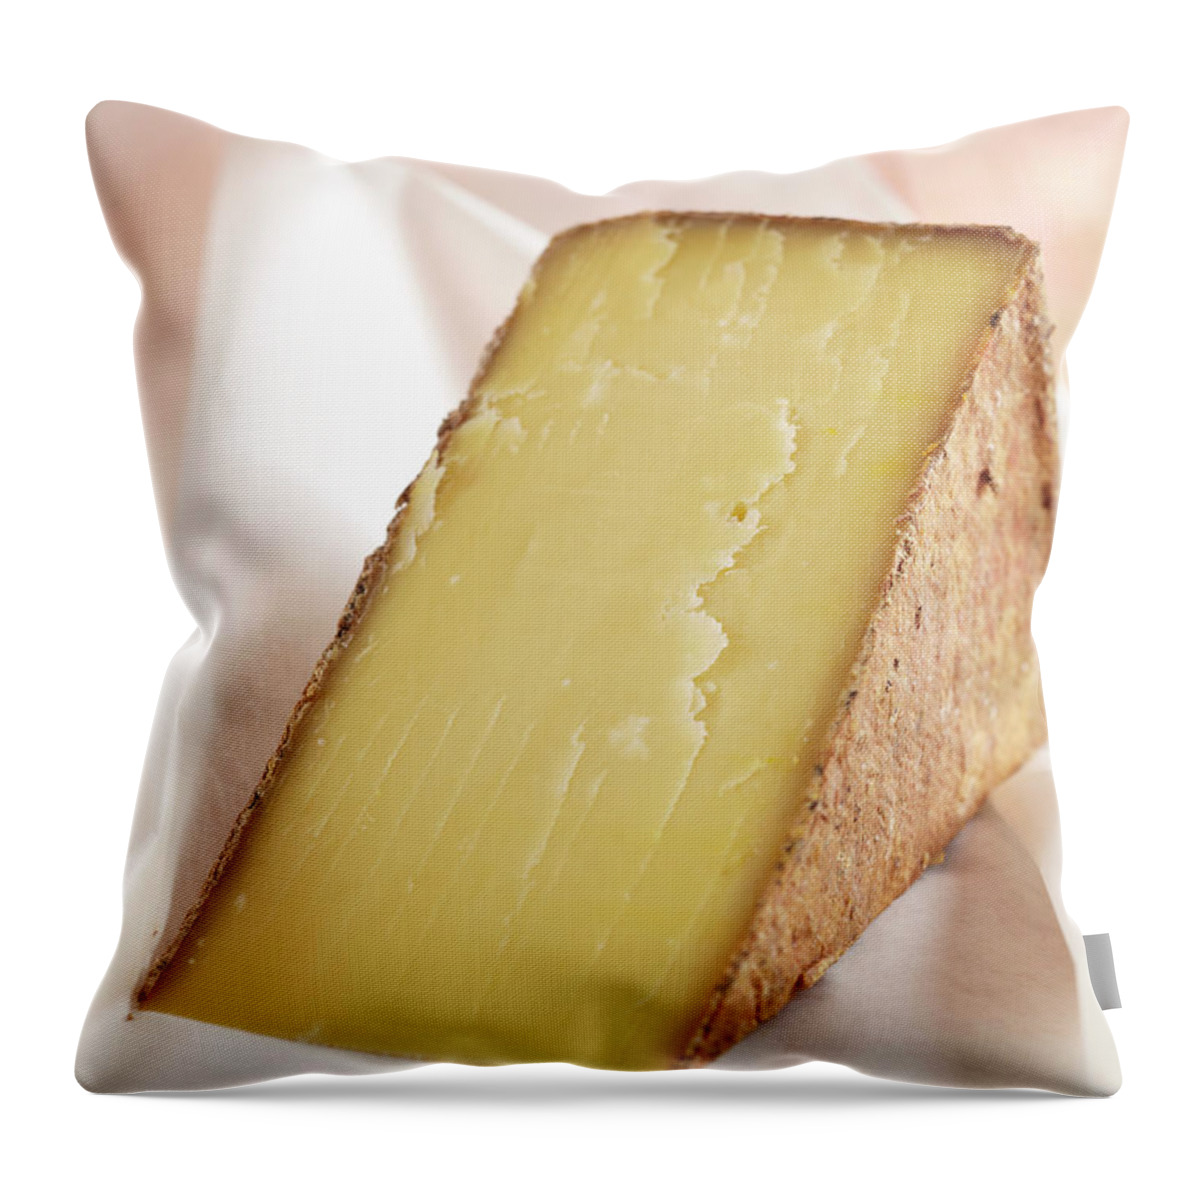 Ip_12683696 Throw Pillow featuring the photograph Mountain Cheese From The Swiss Canton Of Valais by Teubner Foodfoto